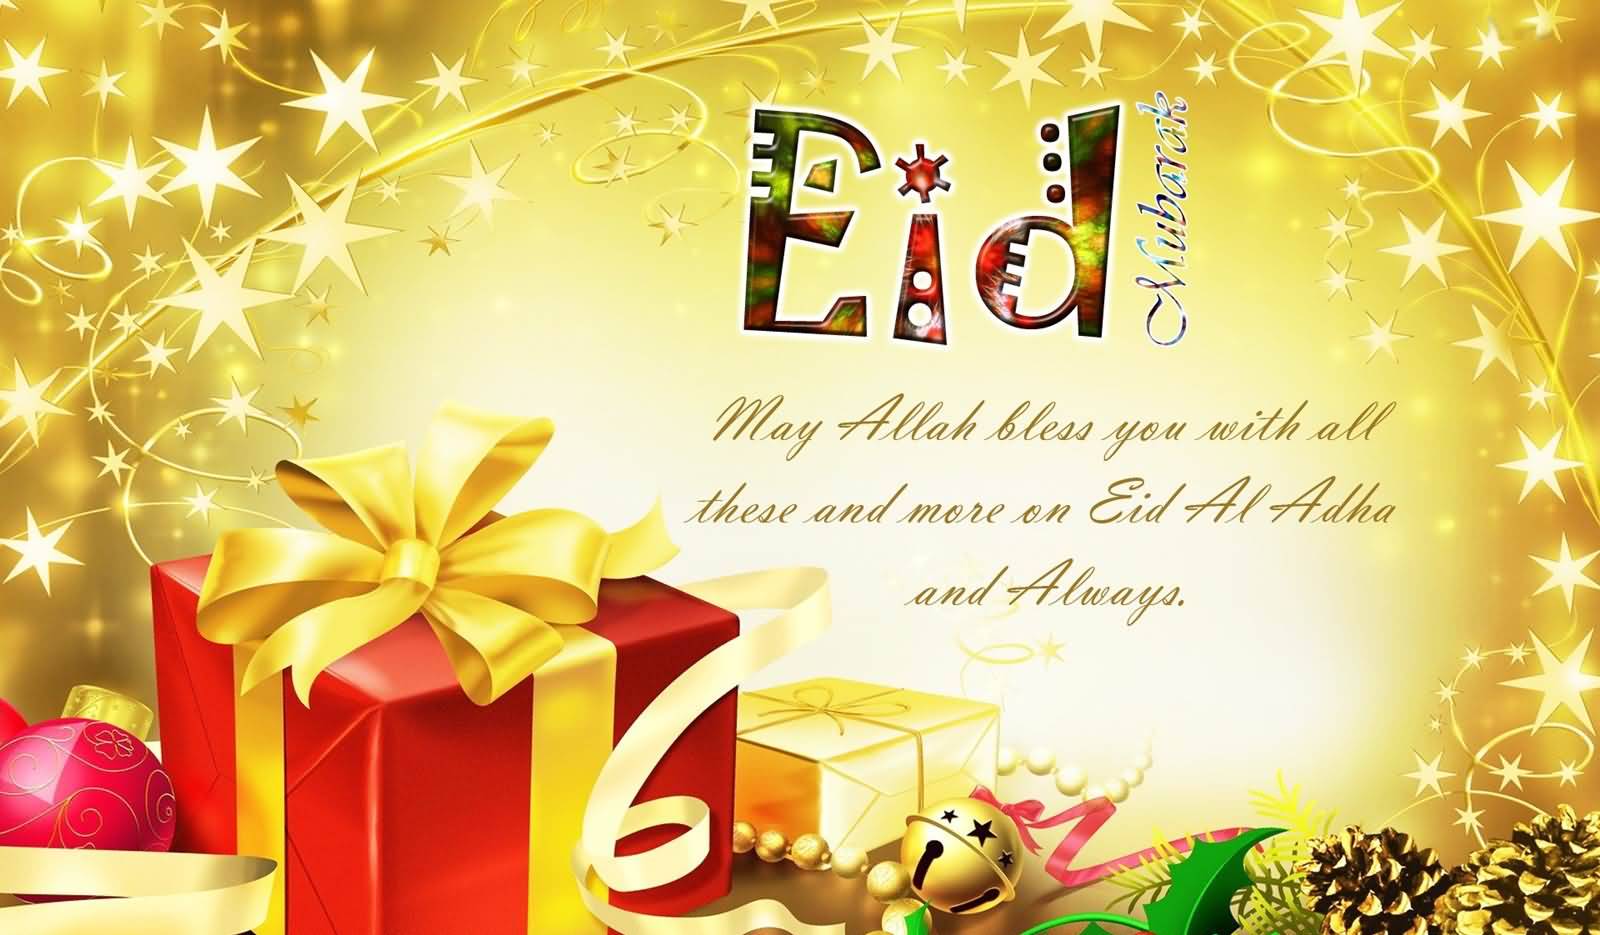 Eid Al-Adha Mubarak 2016 May Allah Bless You With All These And More On Eid Al-Adha And Always